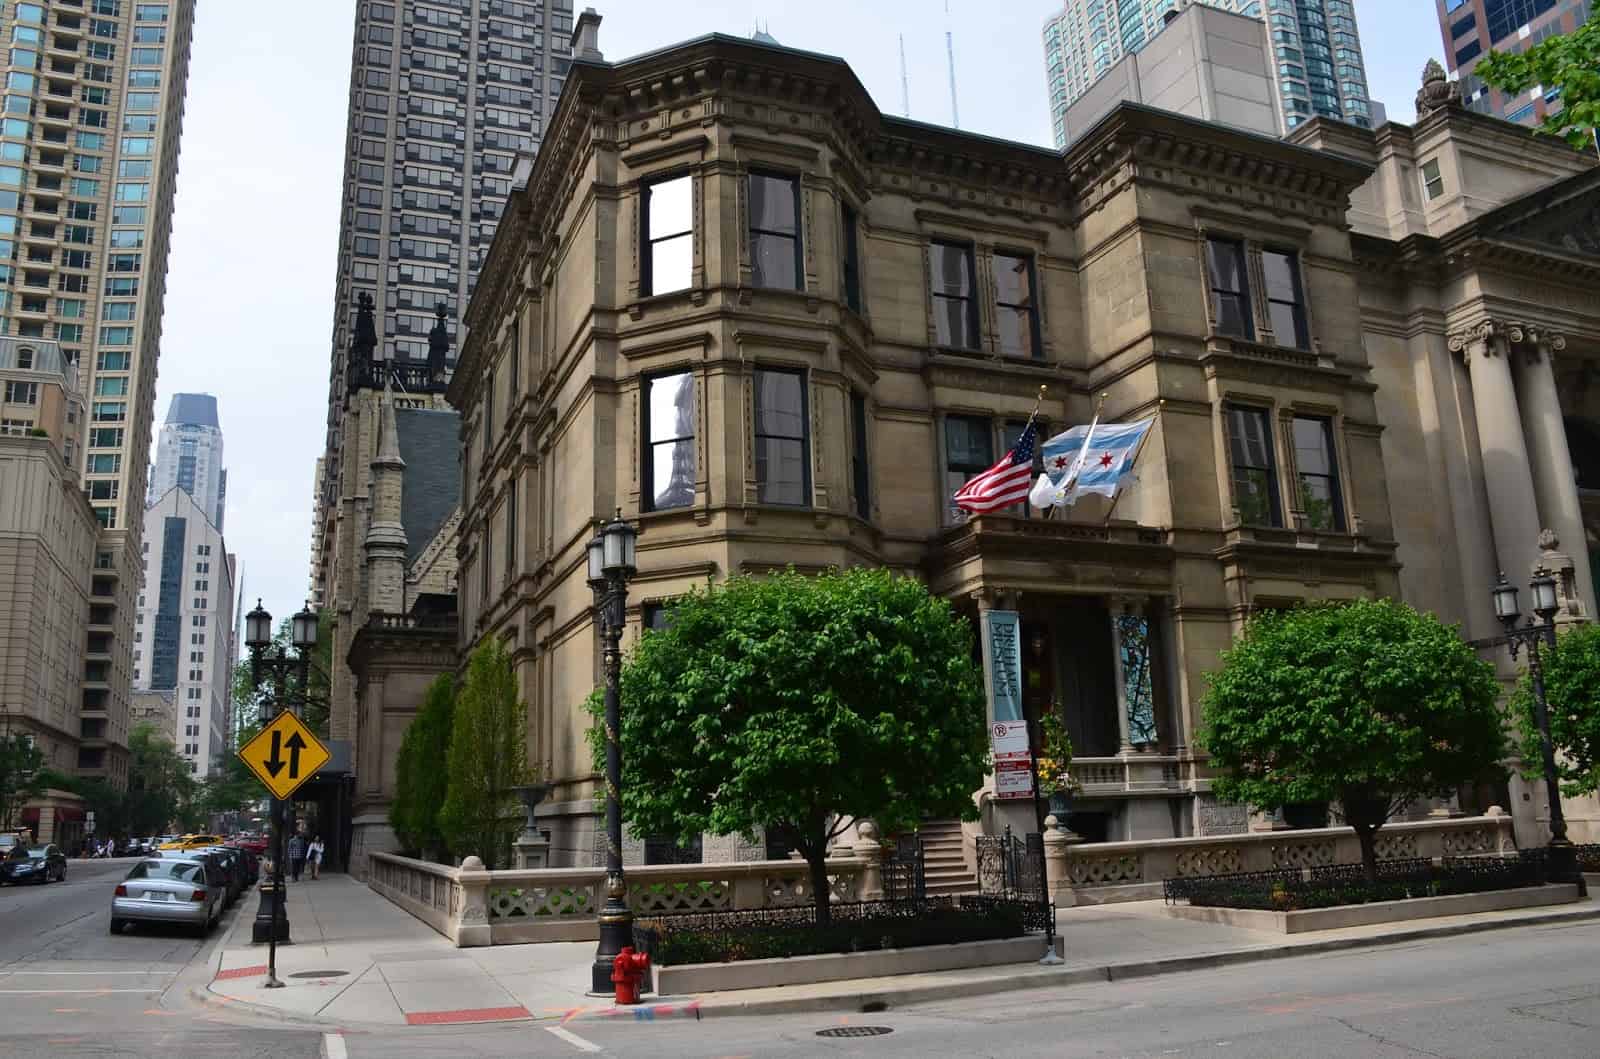 Nickerson House (Driehaus Museum) in River North, Chicago, Illinois